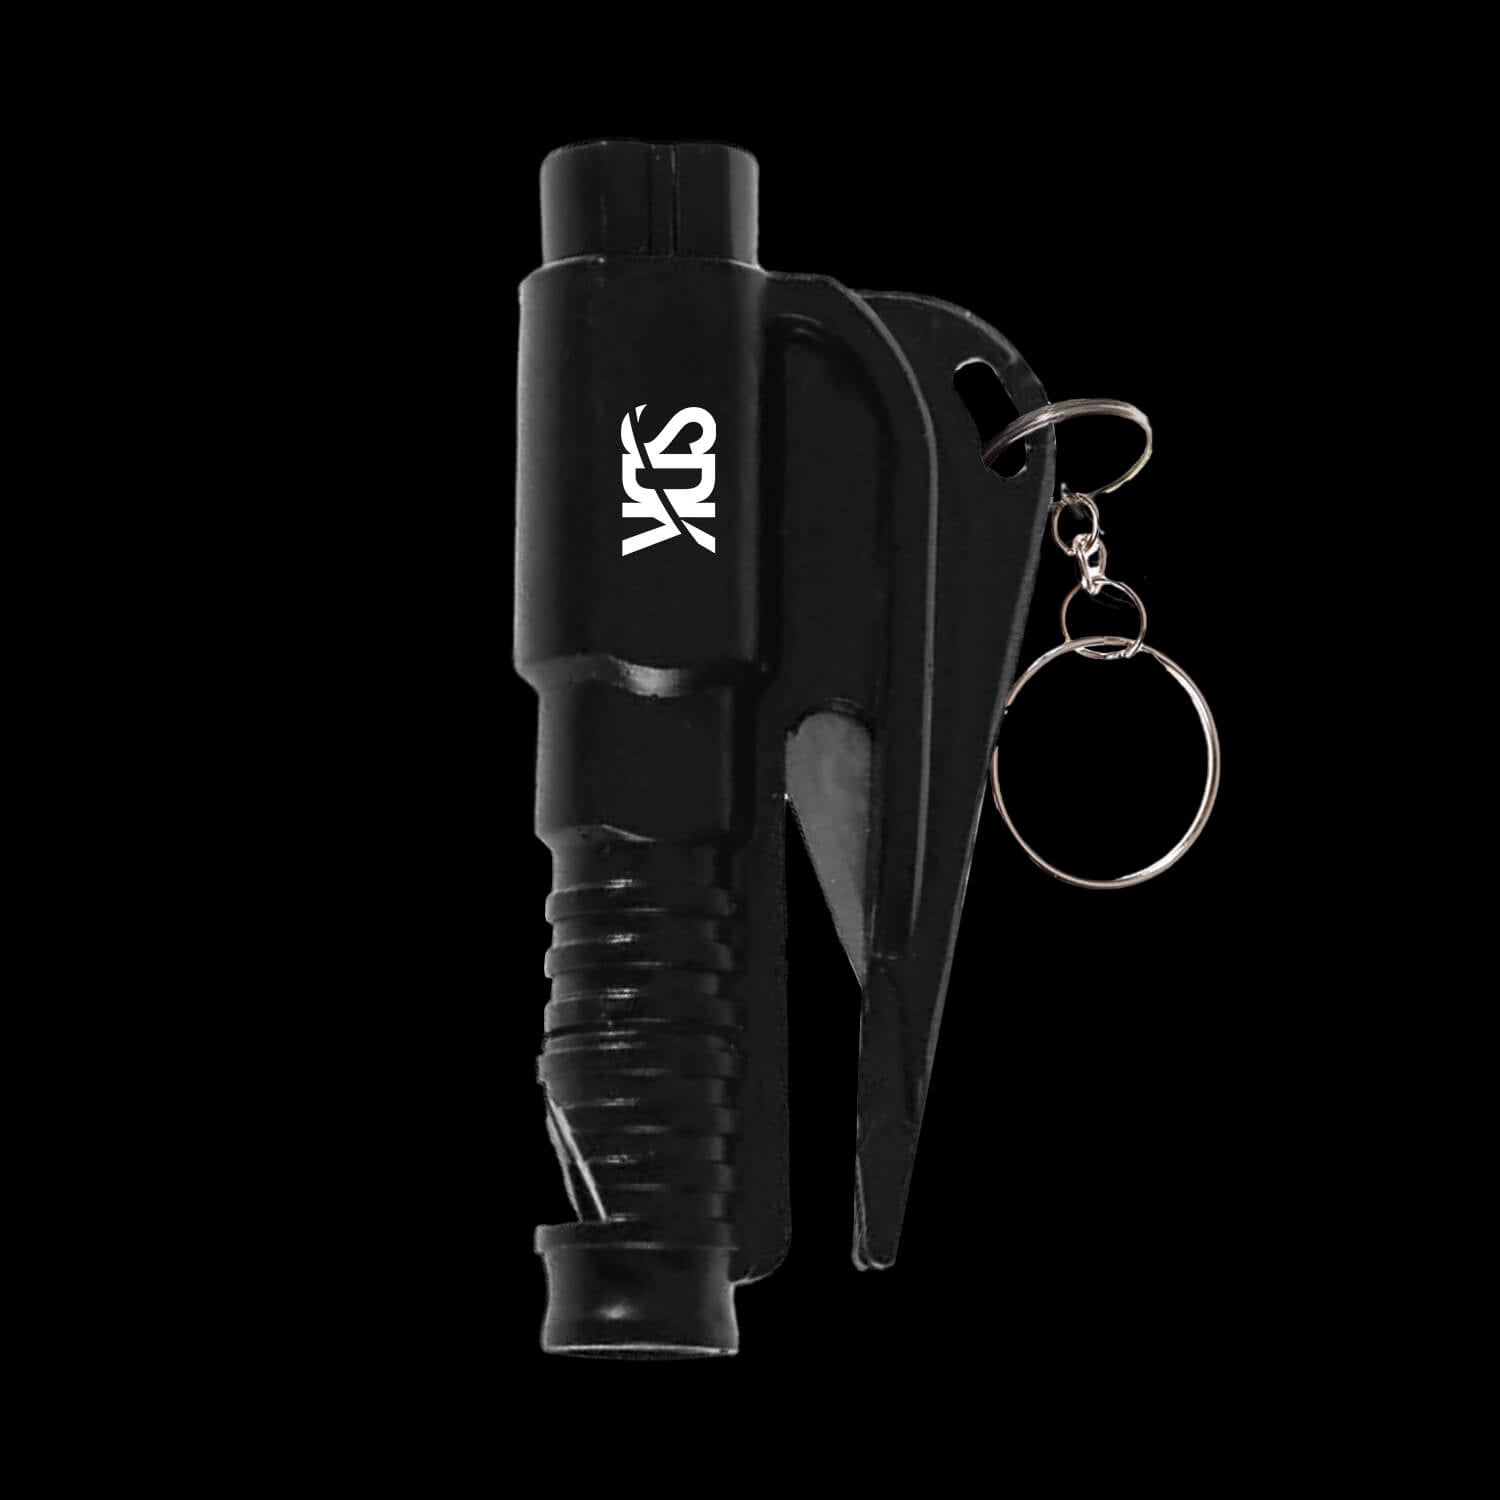 SDK Kit Black Escape Tool (all-in-one seat belt cutter, window breaker and whistle)